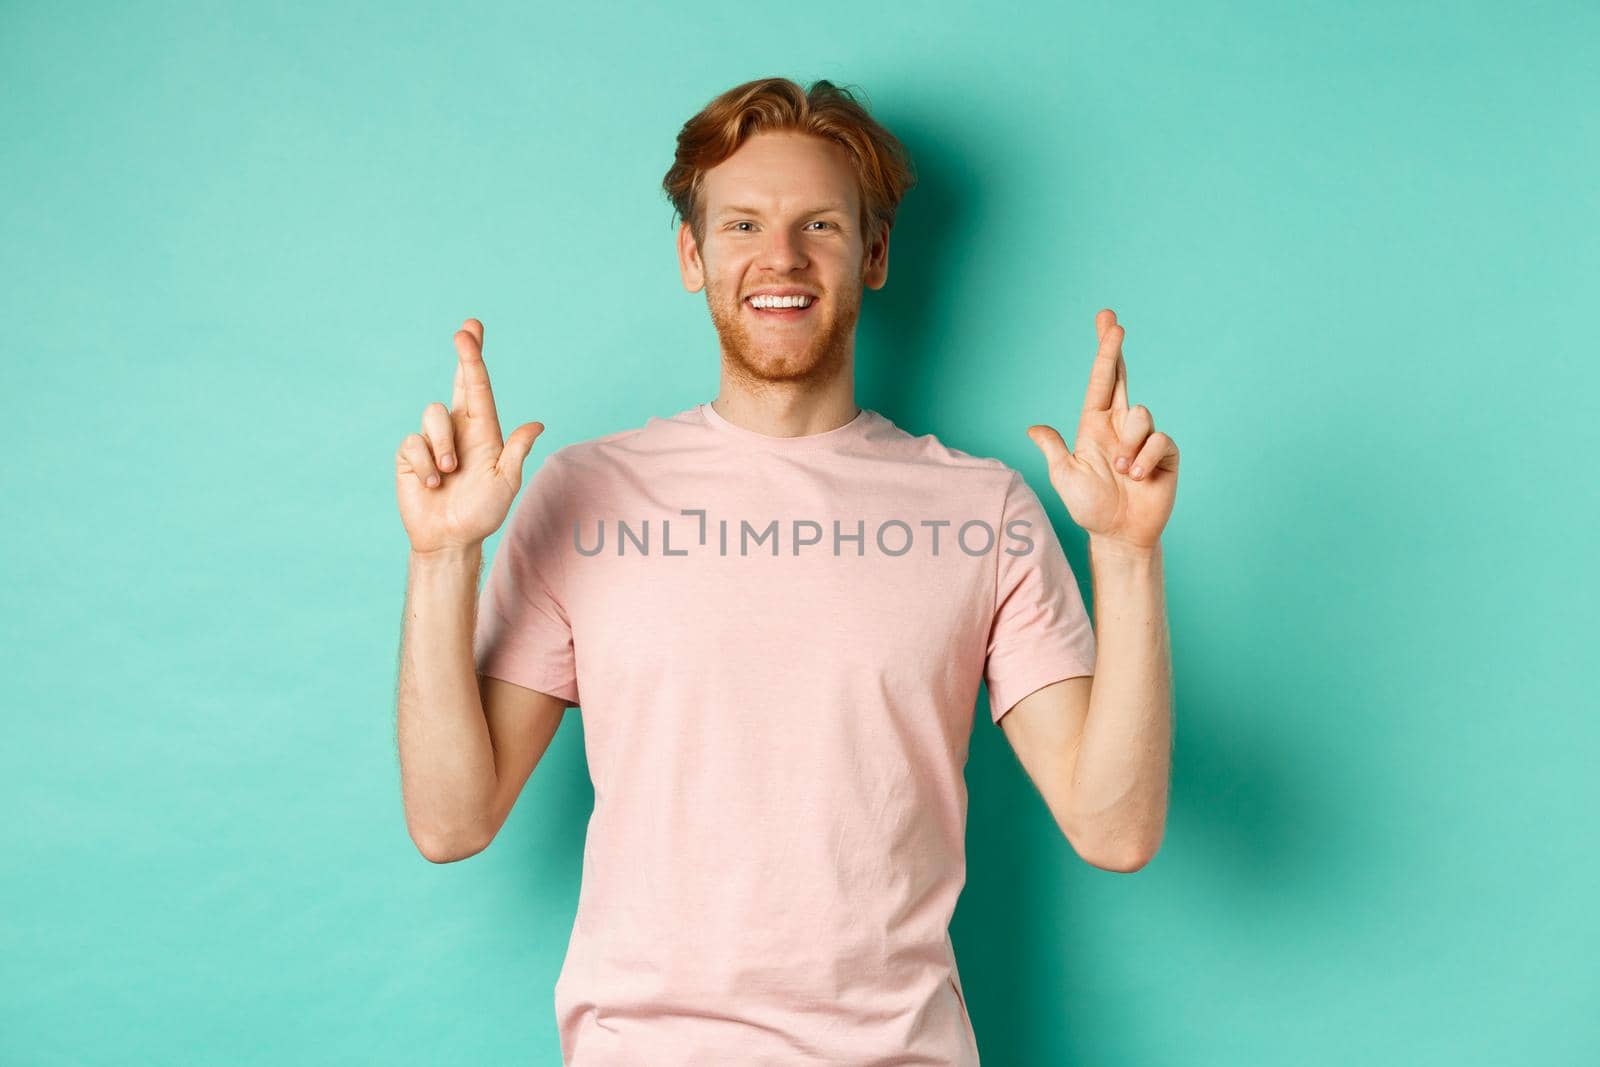 Optimistic guy with red hair and beard smiling, cross fingers for good luck and looking hopeful at camera, making a wish, standing over mint background.